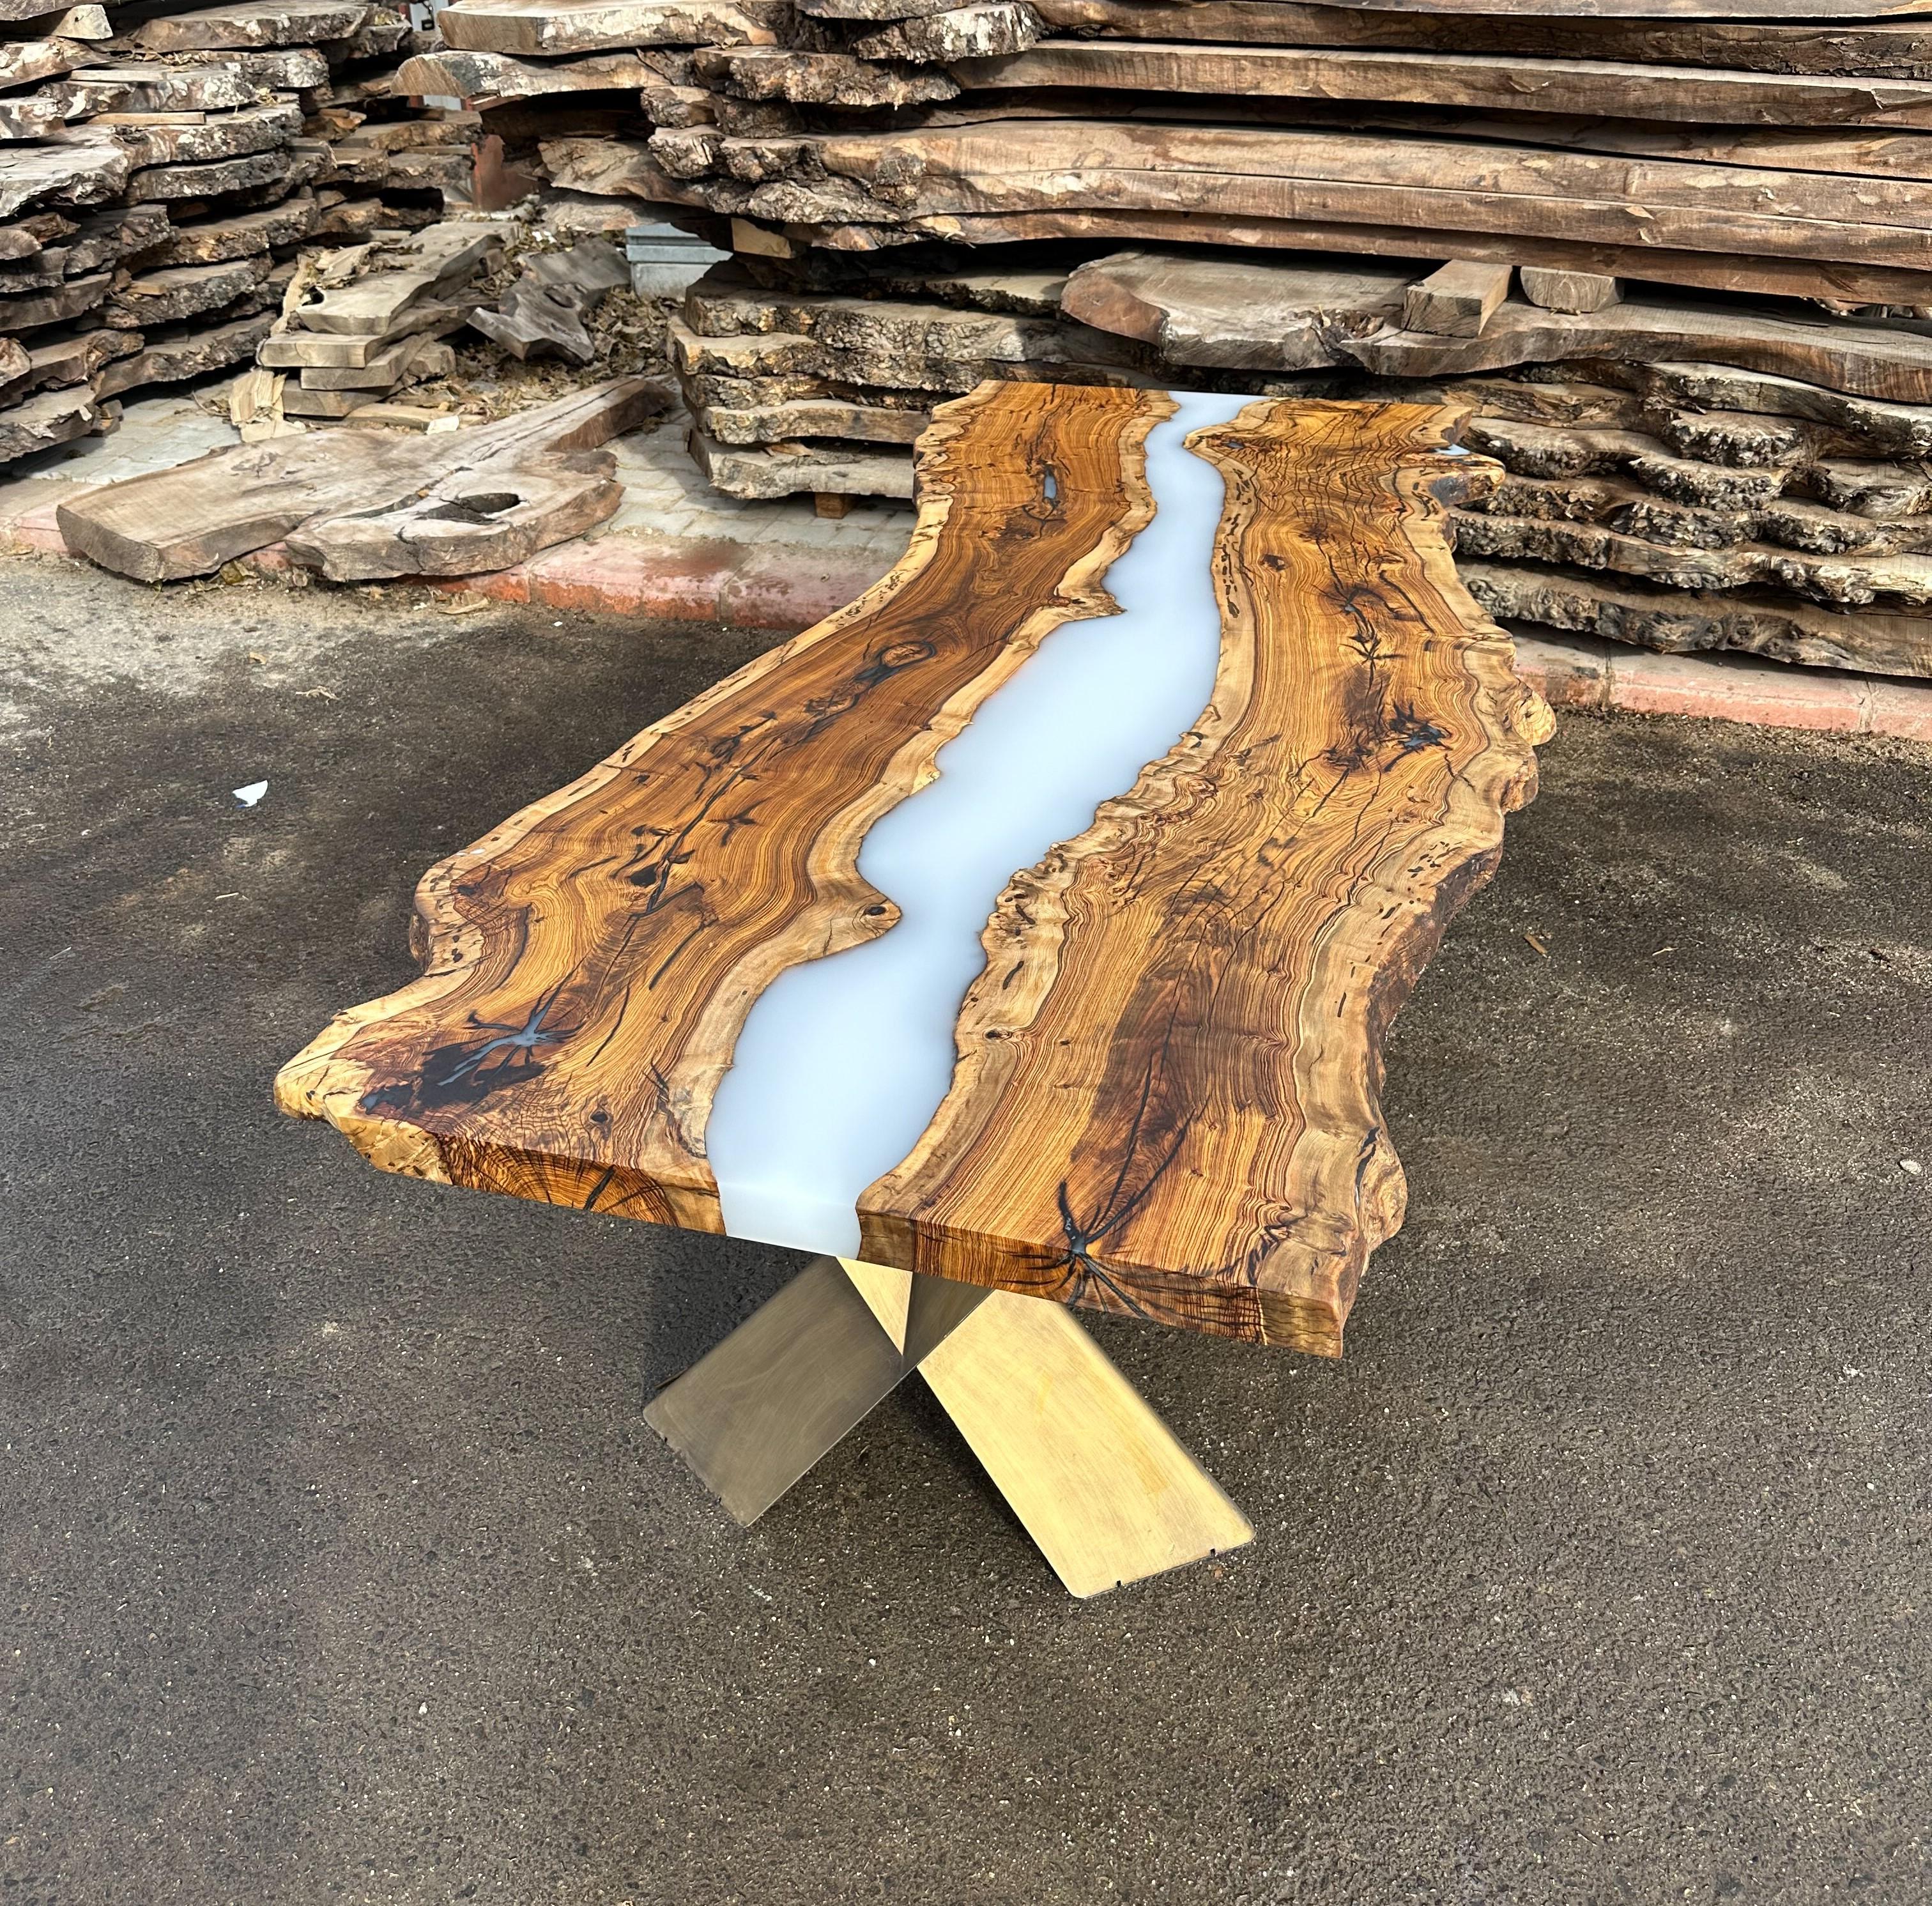 HACKBERRY CREAM RESIN DINING TABLE

This epoxy table emerges as a unique work of art, inspired by nature's beauty. 

The epoxy table stands out not only for its design but also its durability. Thanks to its epoxy coating, it is highly resistant to